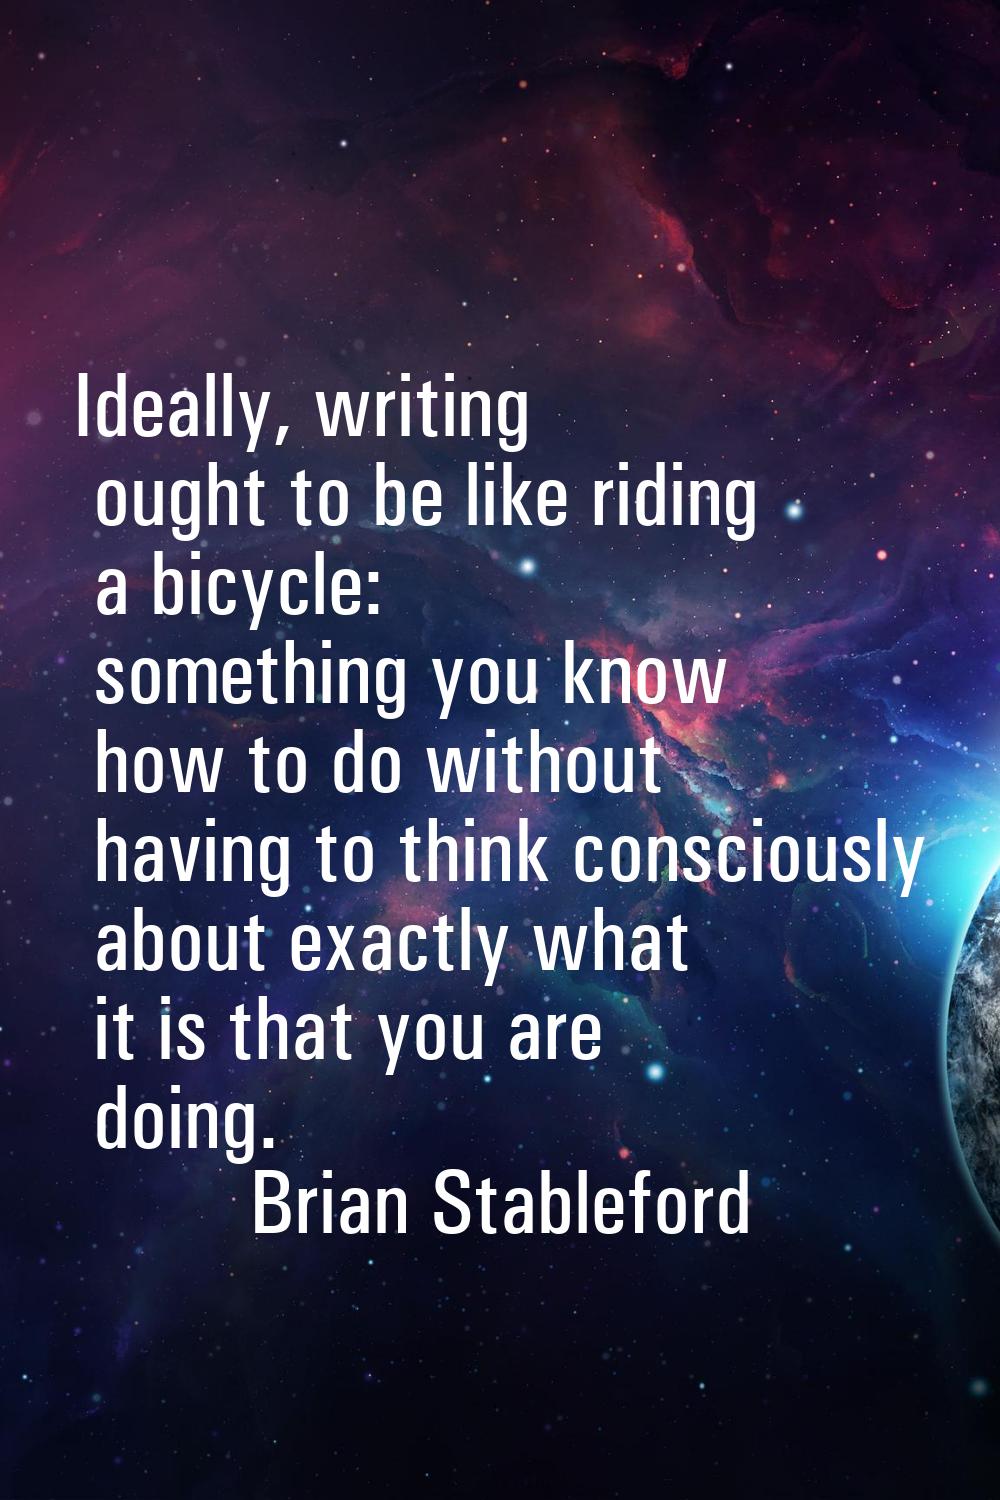 Ideally, writing ought to be like riding a bicycle: something you know how to do without having to 